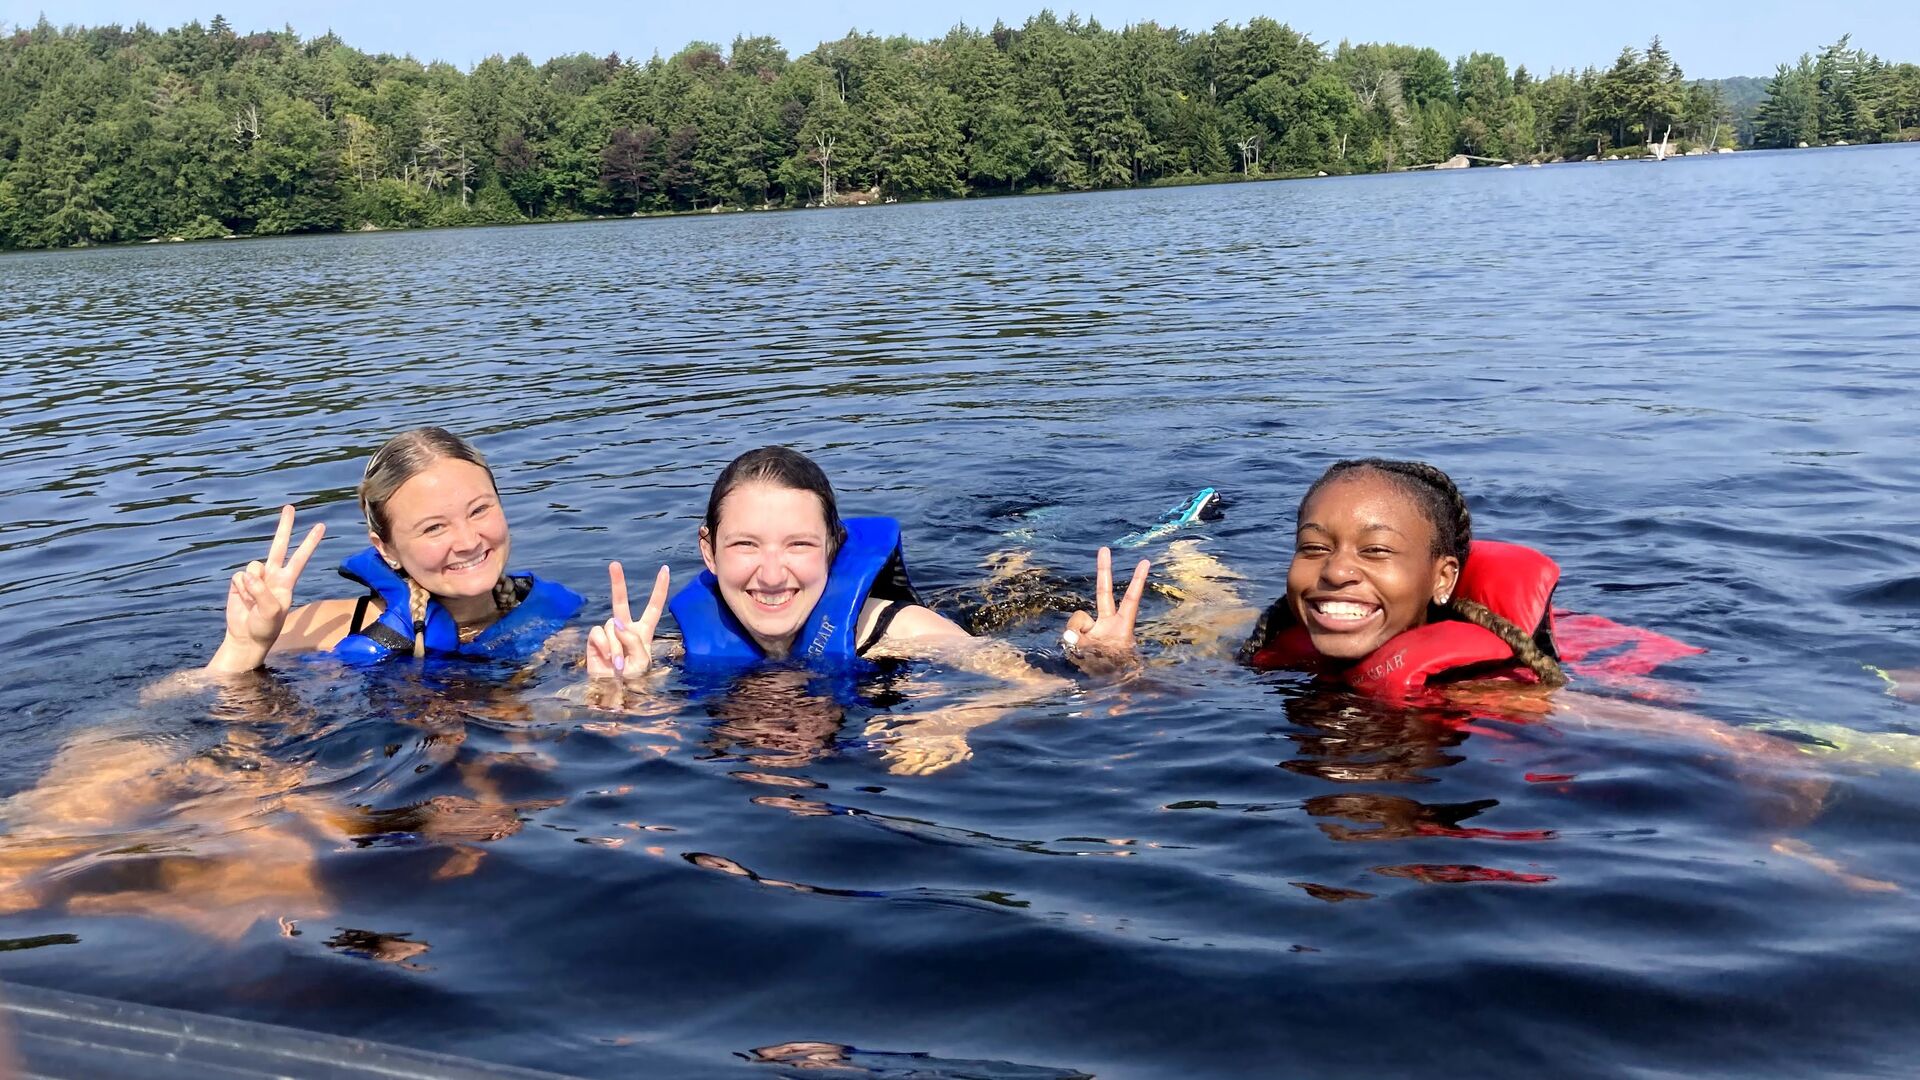 Students swimming in lake during Highlander Wilderness Adventure.